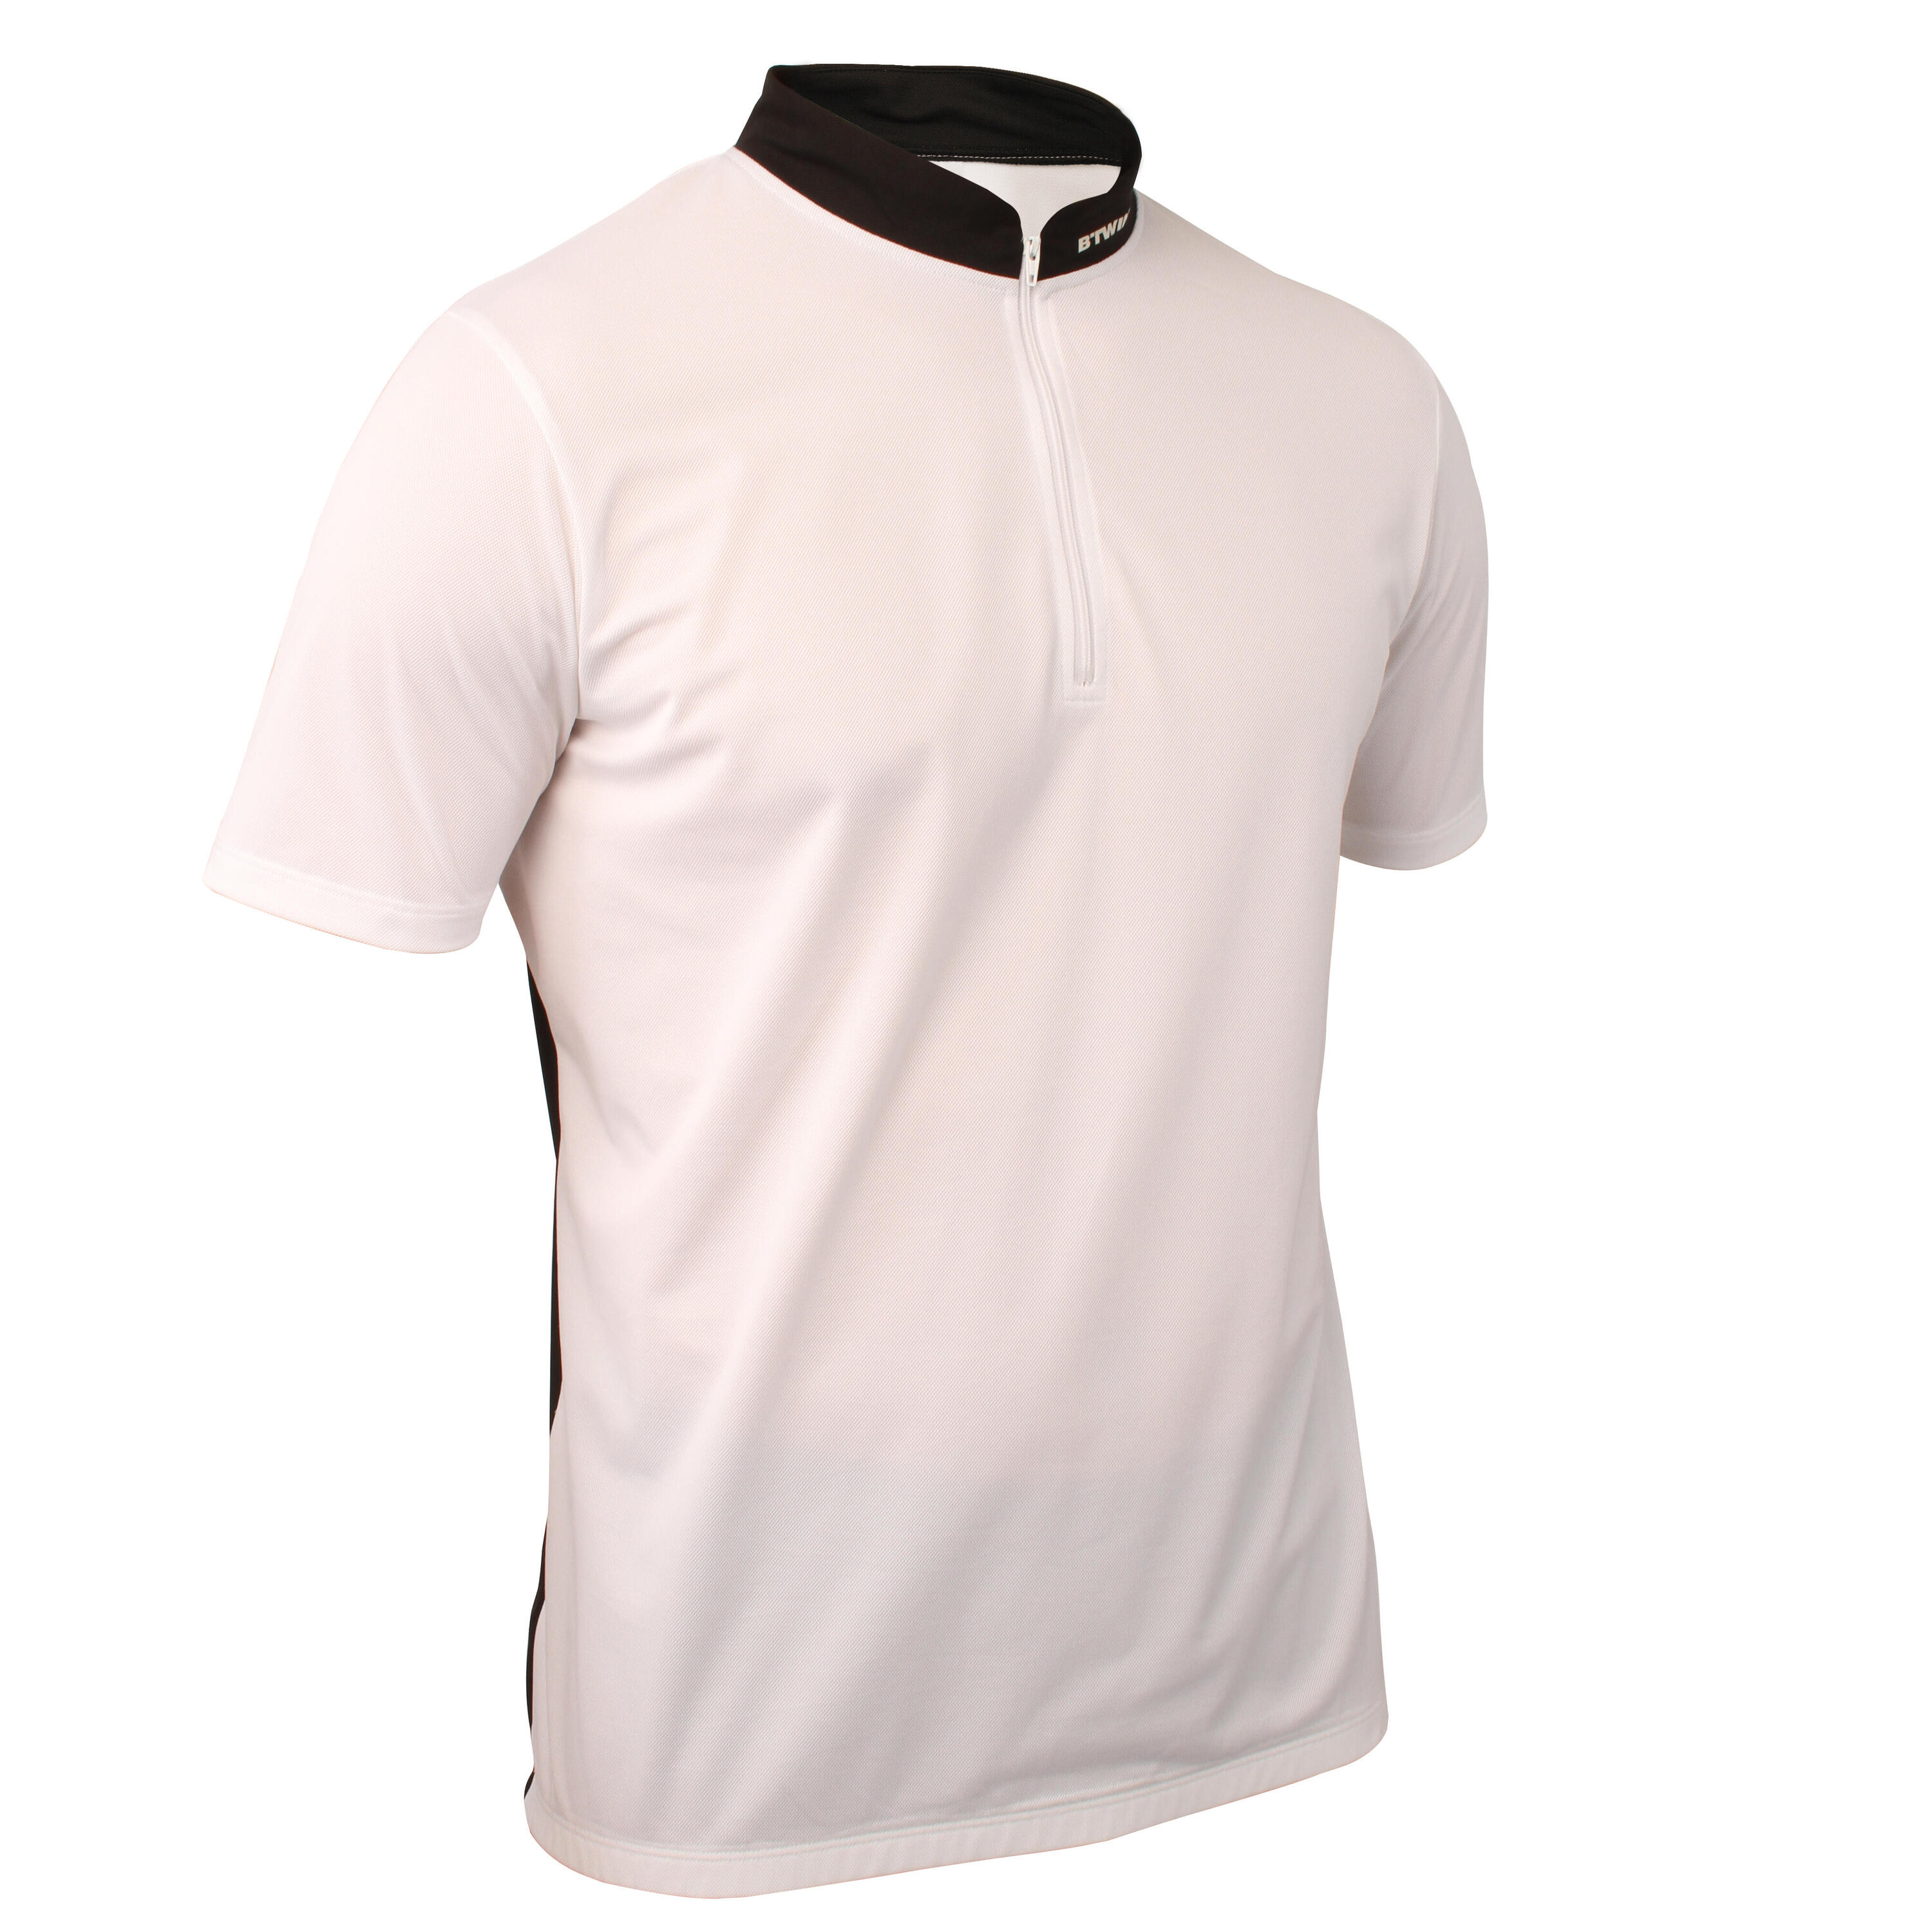 BTWIN Roadcycling 100 Short-Sleeved Cycling Jersey - White/Black